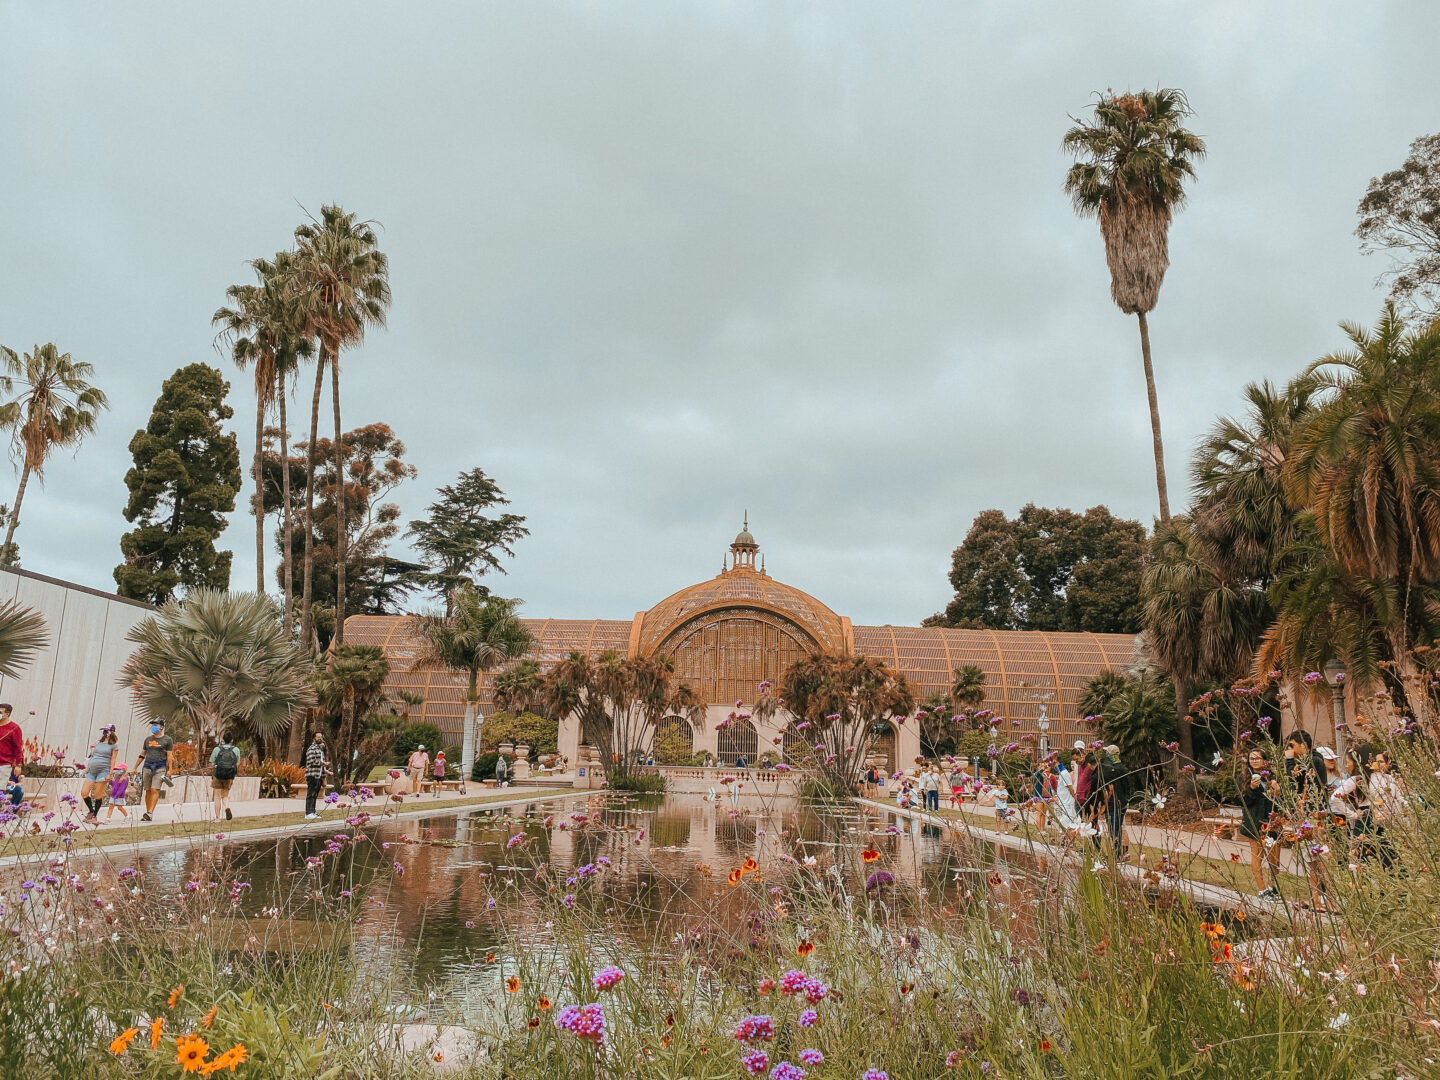 Things to do in Balboa Park: How to spend one day at San Diego's top attraction Palm Trees and Pellegrino San Diego travel tips - The Botanical Building in Balboa Park